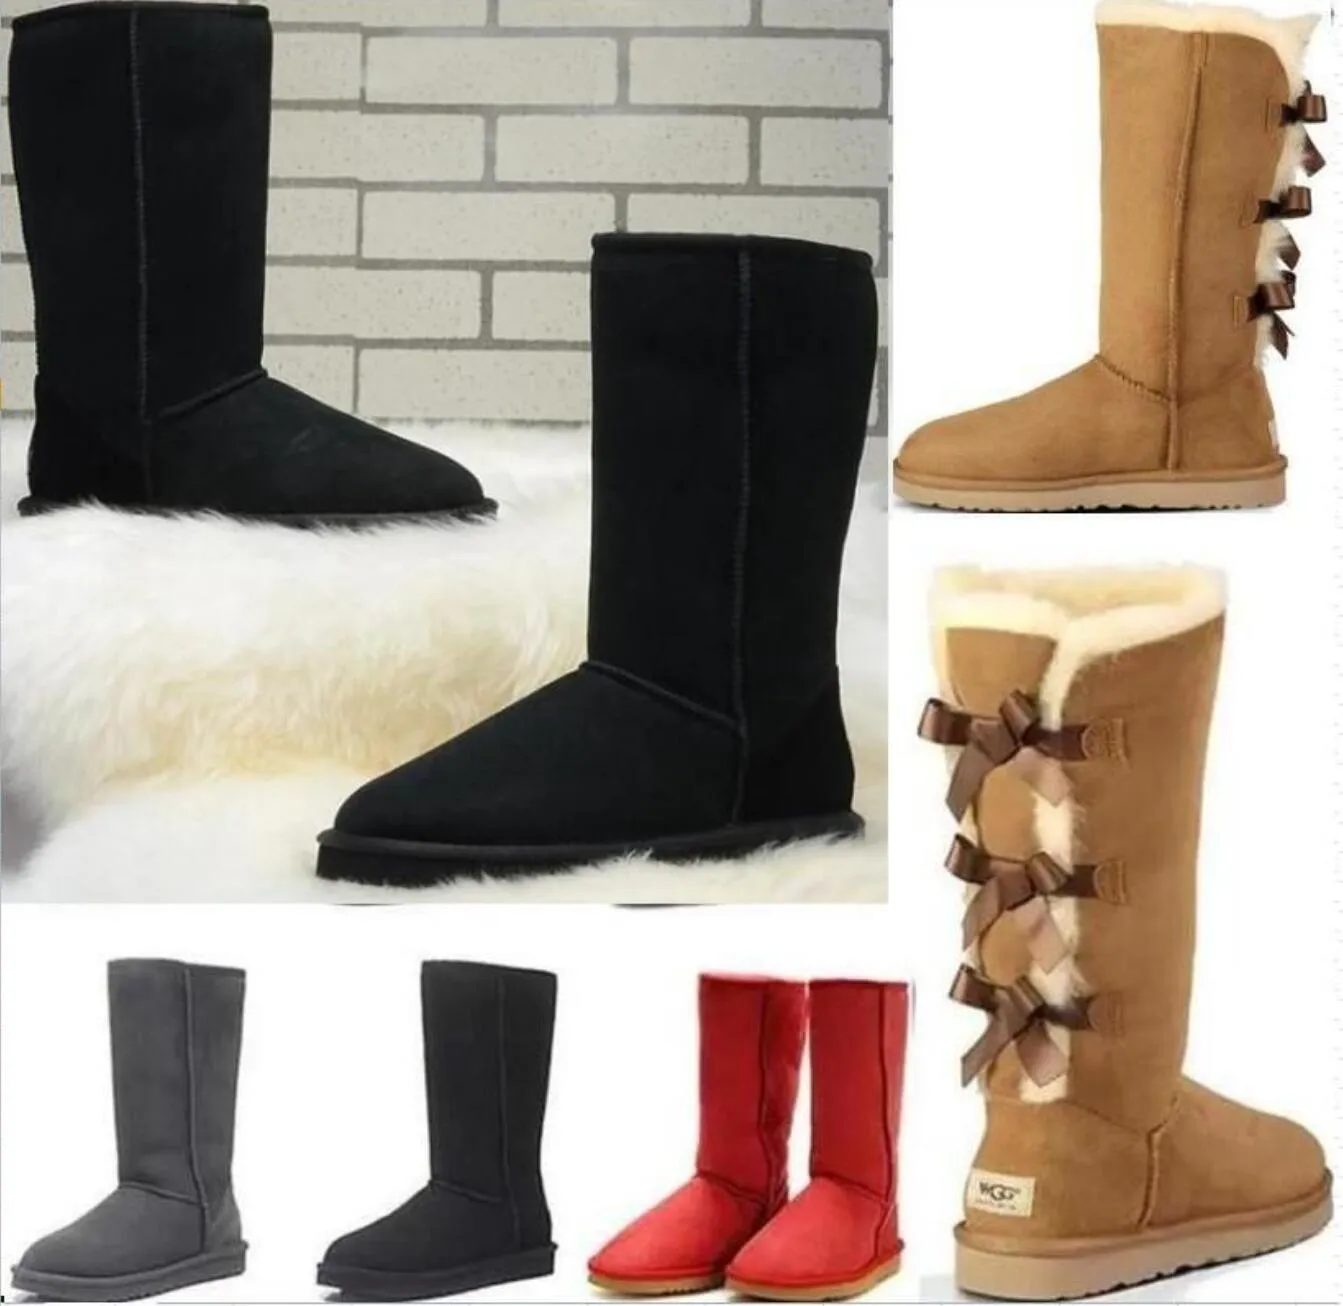 High Quality WGG Women's Classic tall Boots Womens Australia Snow Winter leather Warm winter shoes US SIZE 5---10 UGGitys